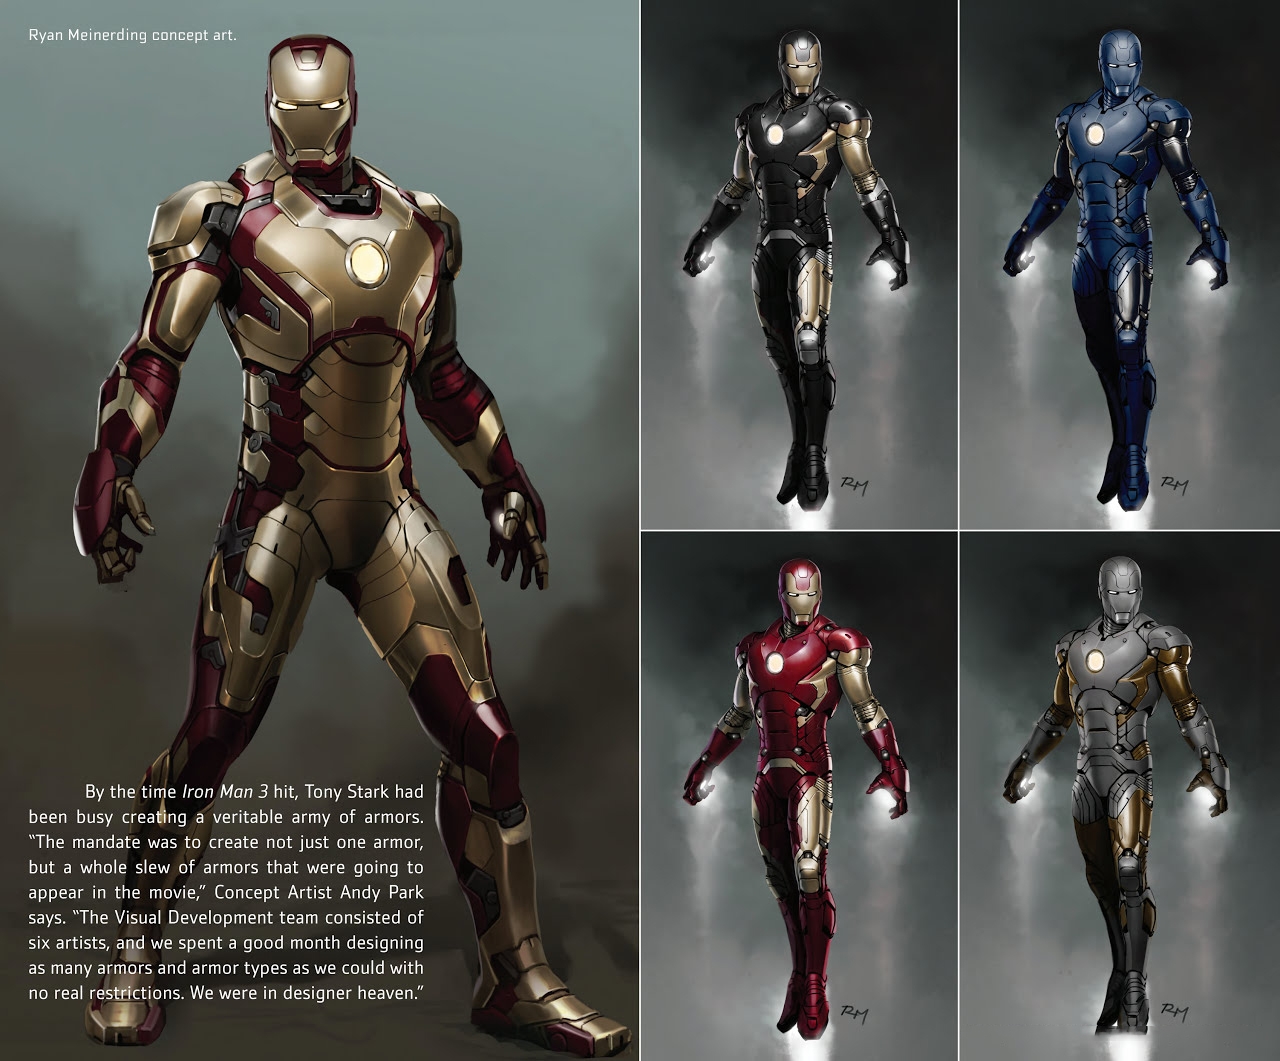 The Road to Marvel's Avengers Age of Ultron - The Art of the Marvel Cinematic Universe 56